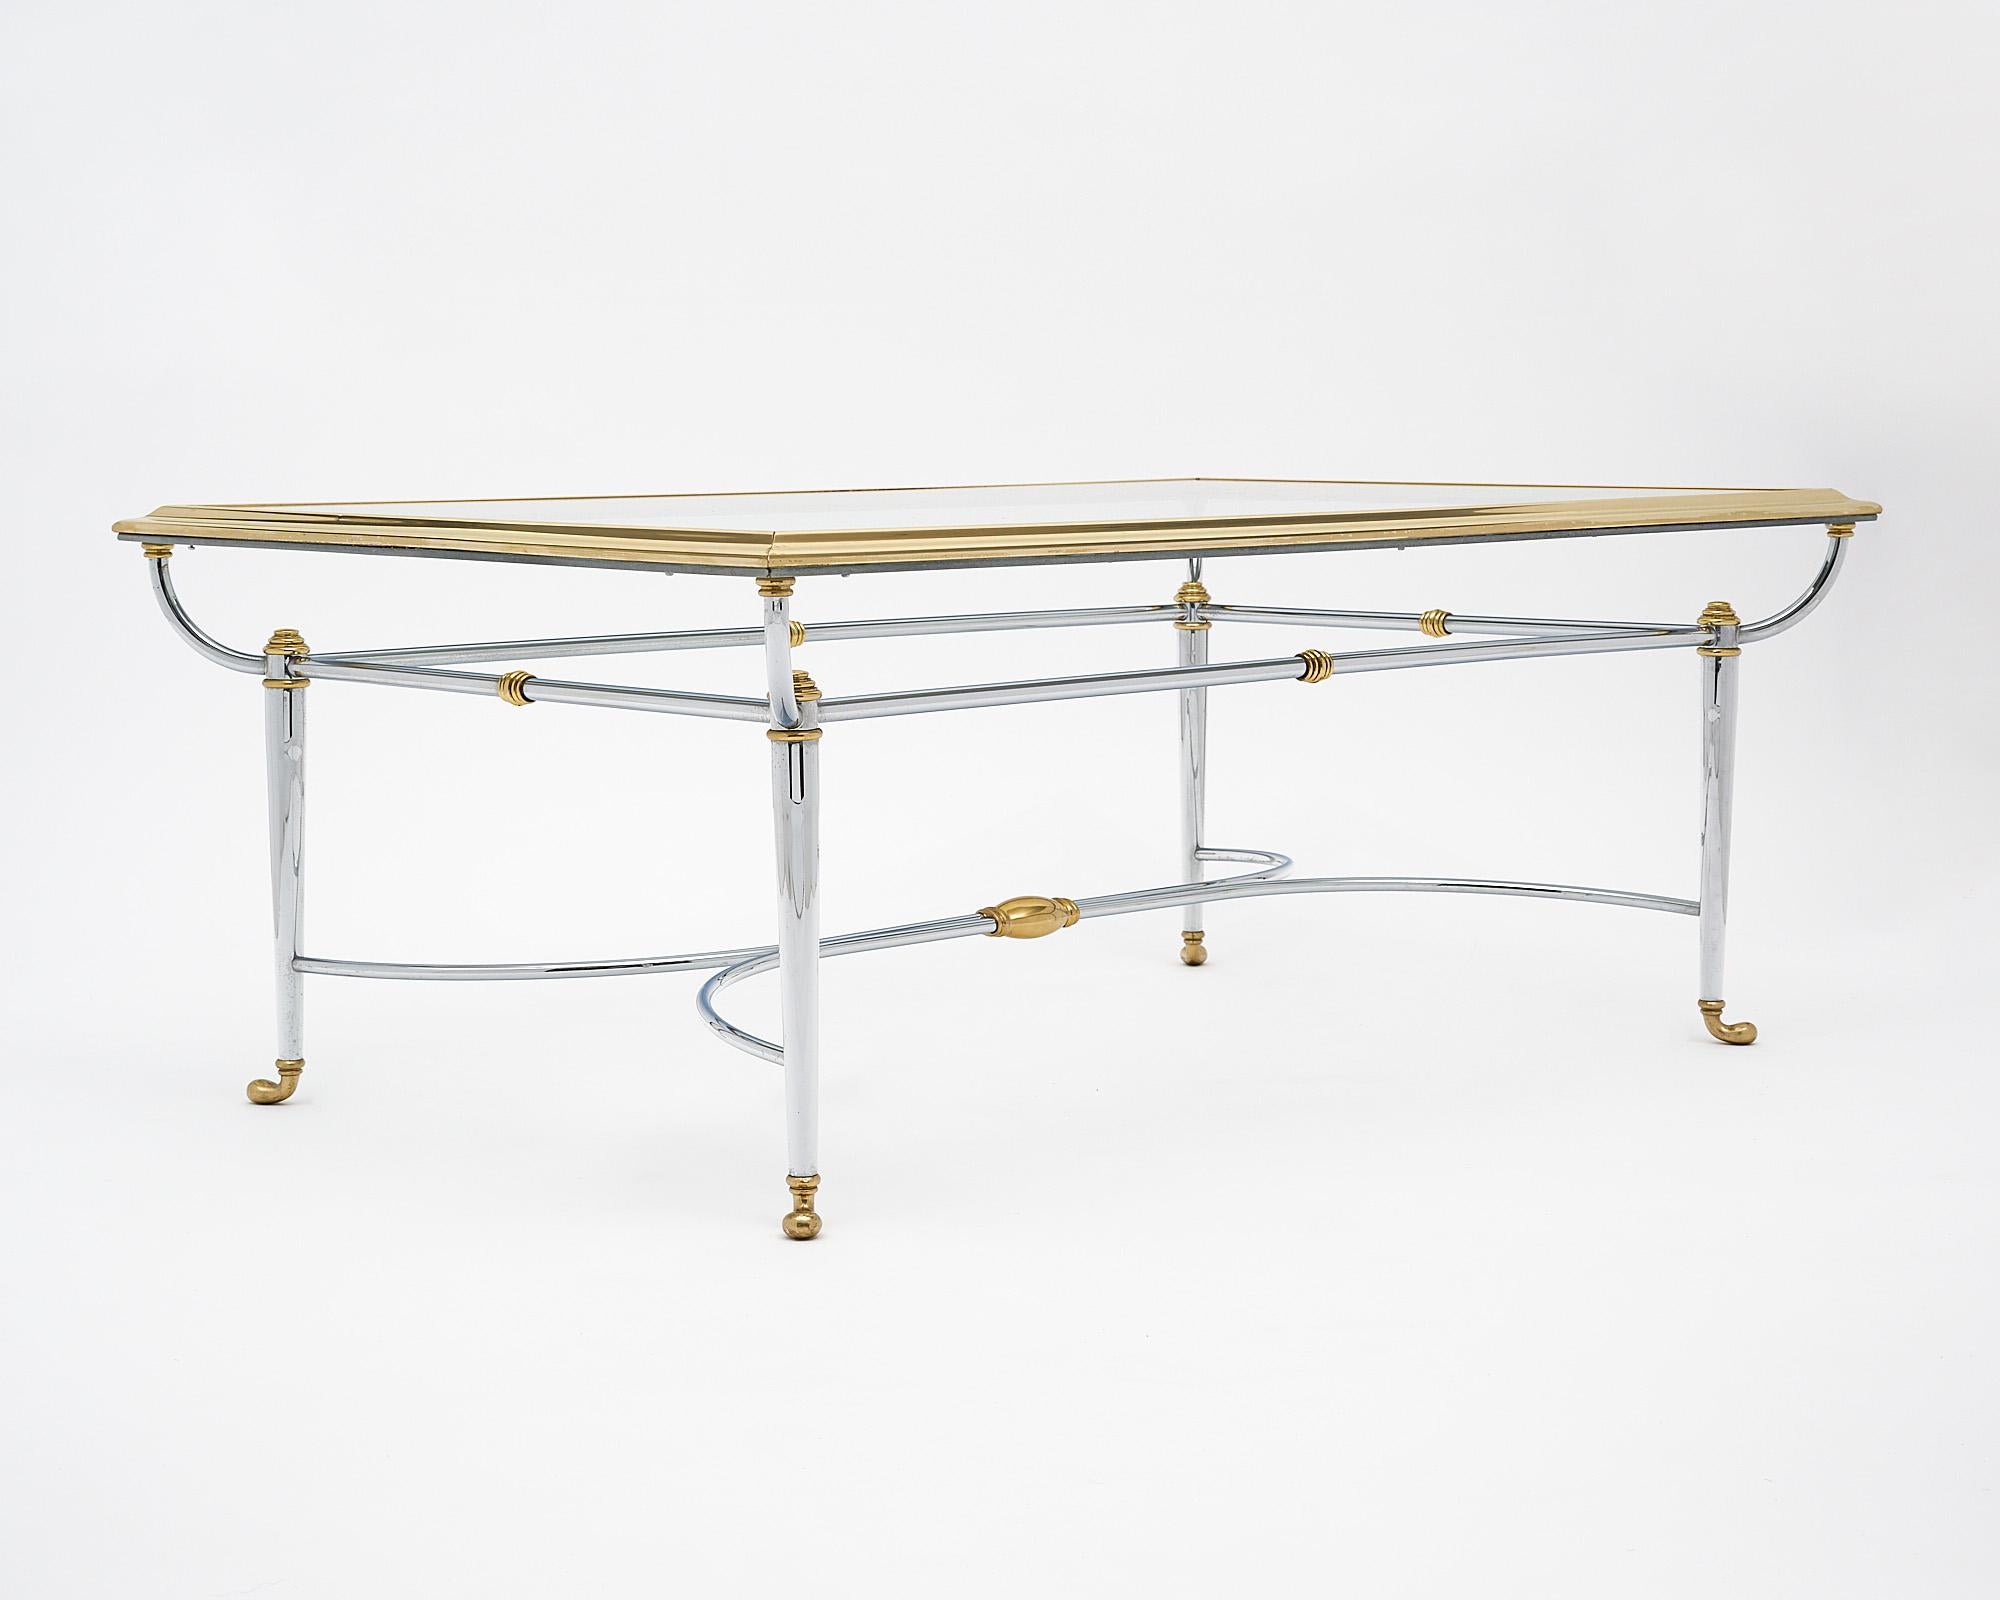 Coffee table, French, made of chromed steel and brass crafted by mid-century iconic Parisian firm “Maison Charles”. It is topped with a shelf of clear glass.